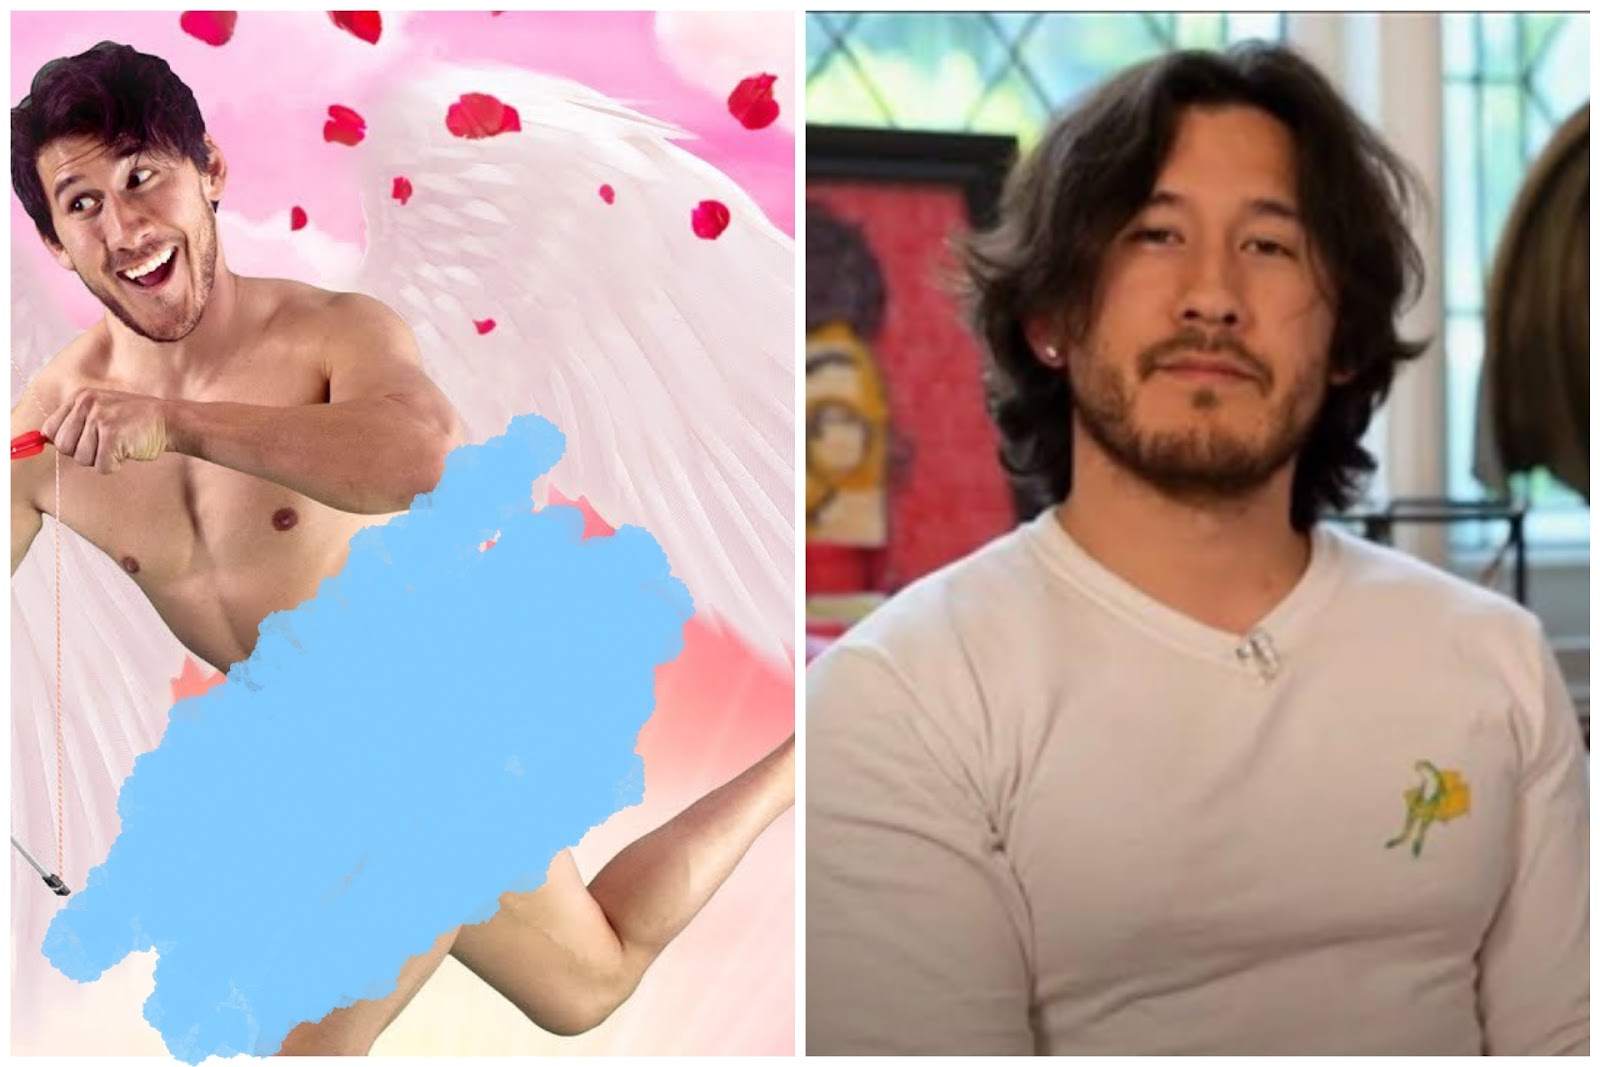 How Much Money Did Markiplier Make On His Onlyfans